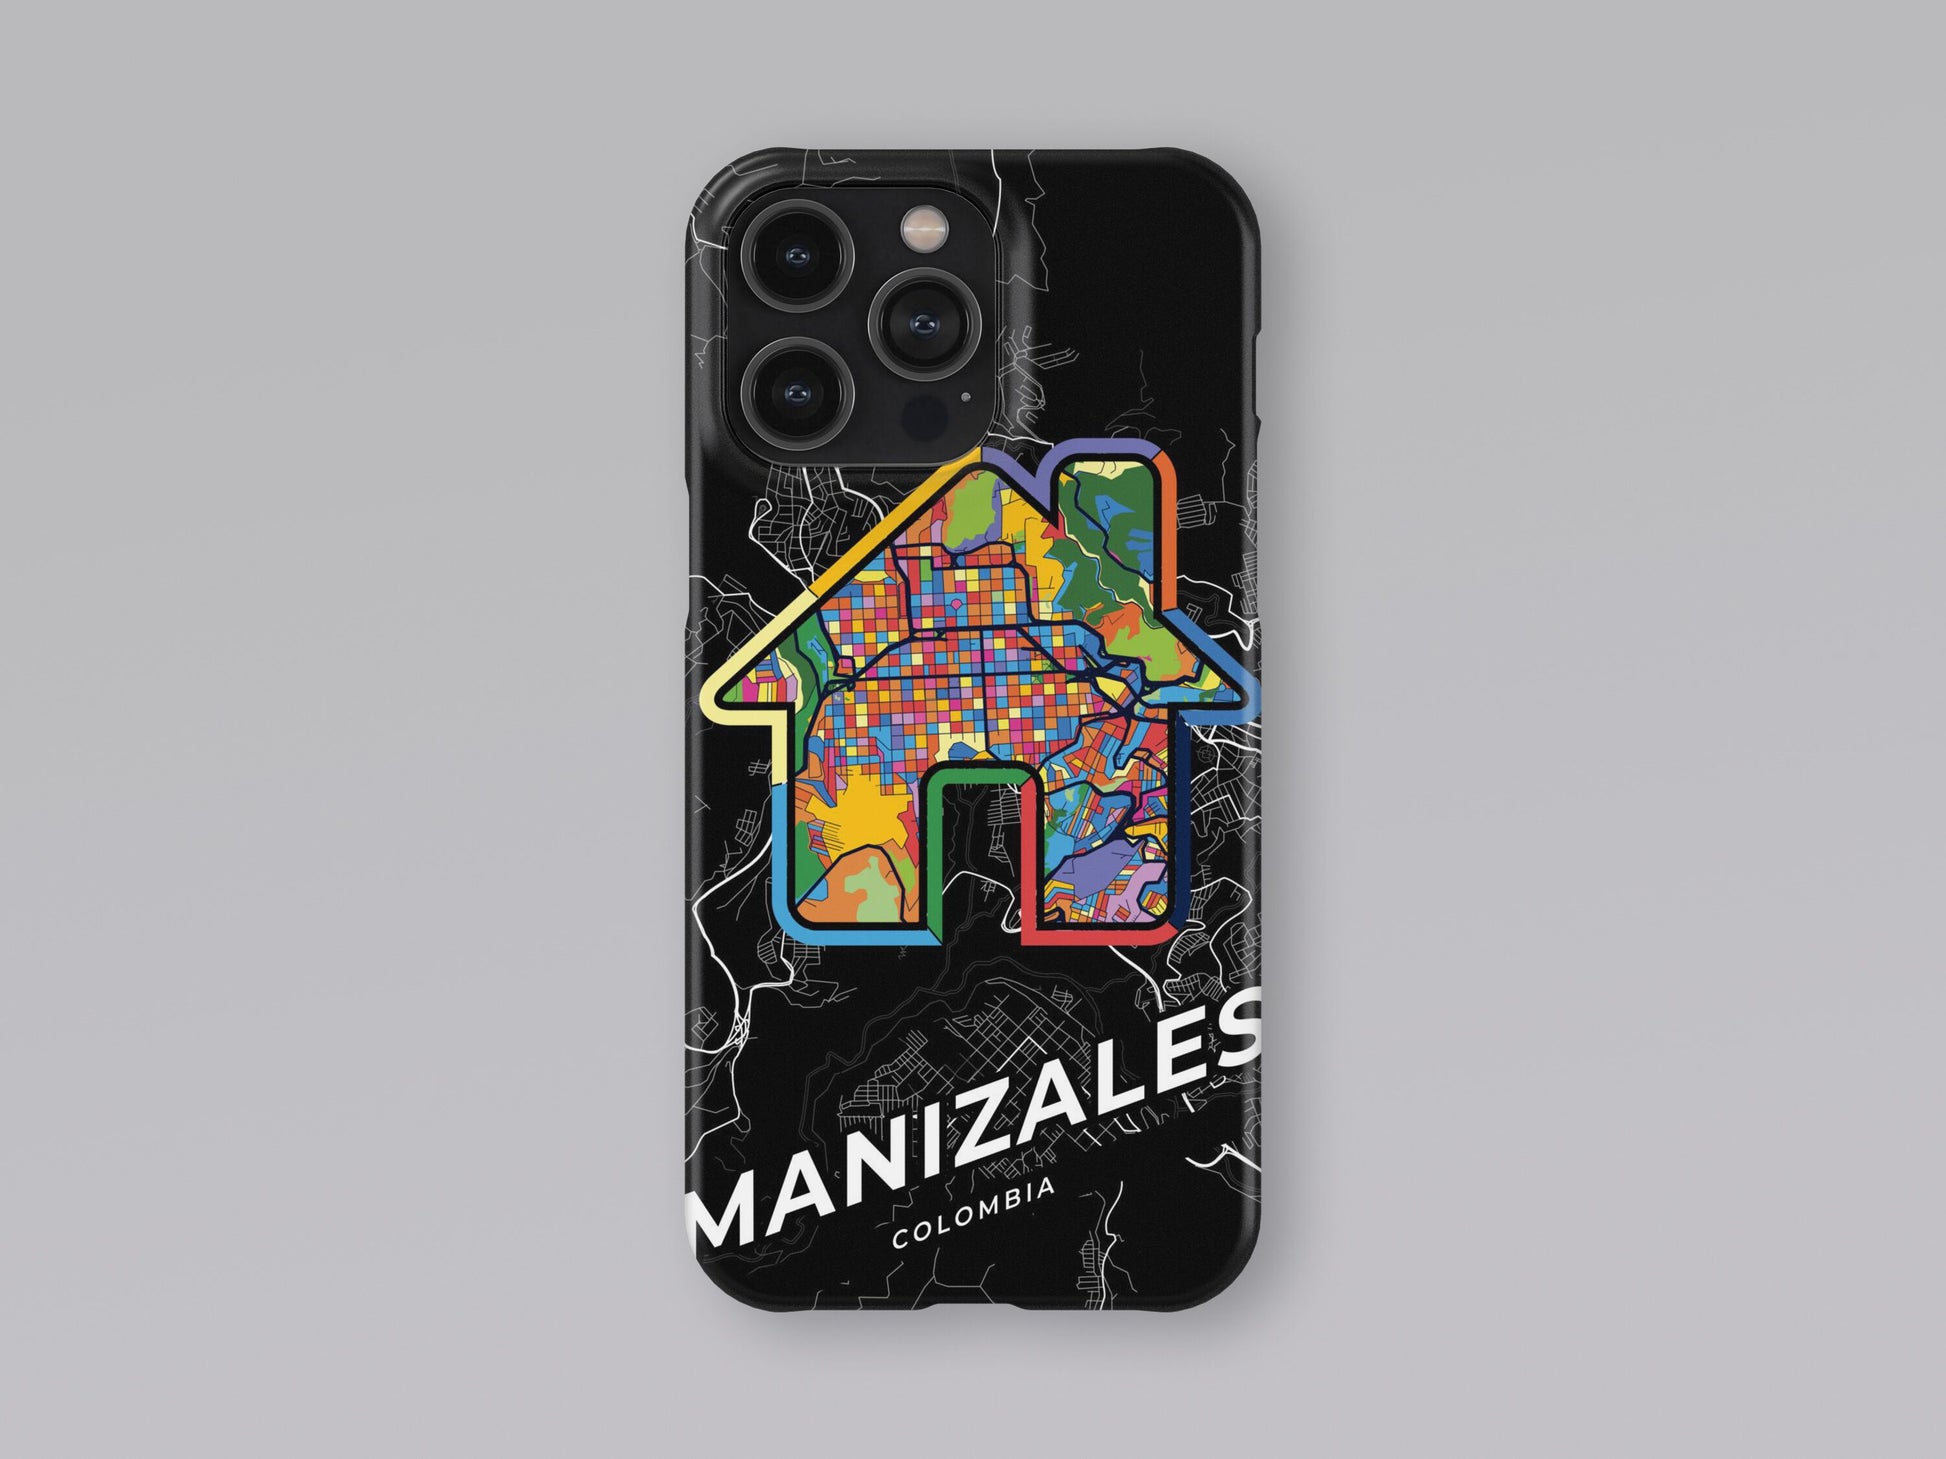 Manizales Colombia slim phone case with colorful icon. Birthday, wedding or housewarming gift. Couple match cases. 3